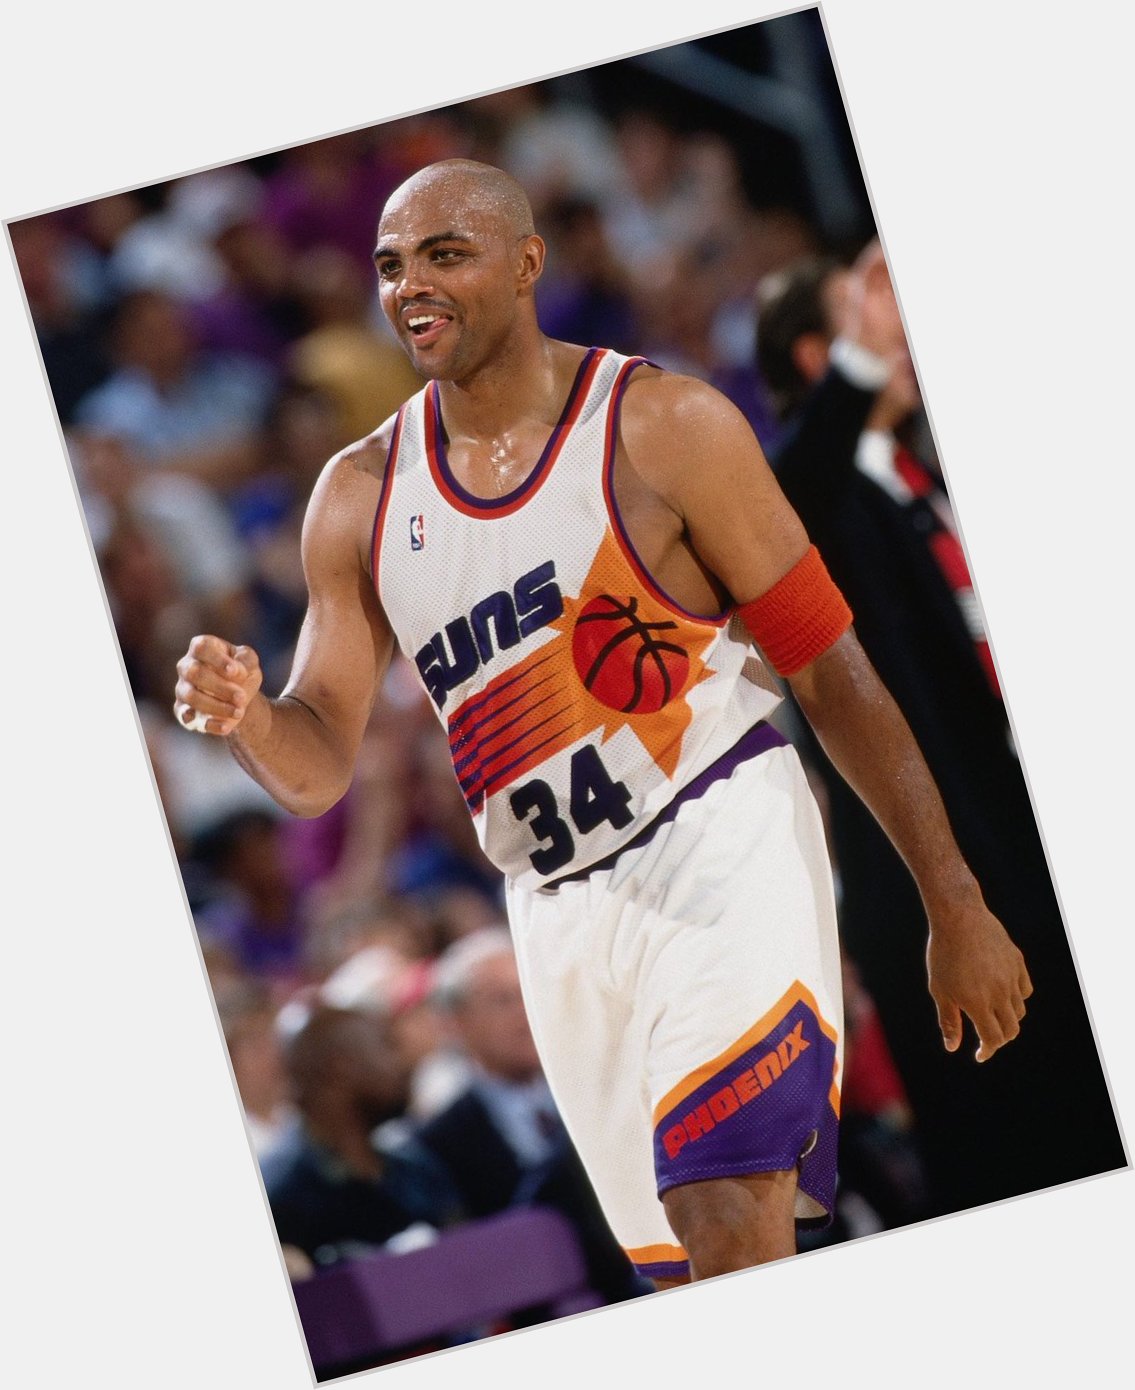 Happy 54th Birthday to 11x All-Star and Hall of Famer Charles Barkley! 